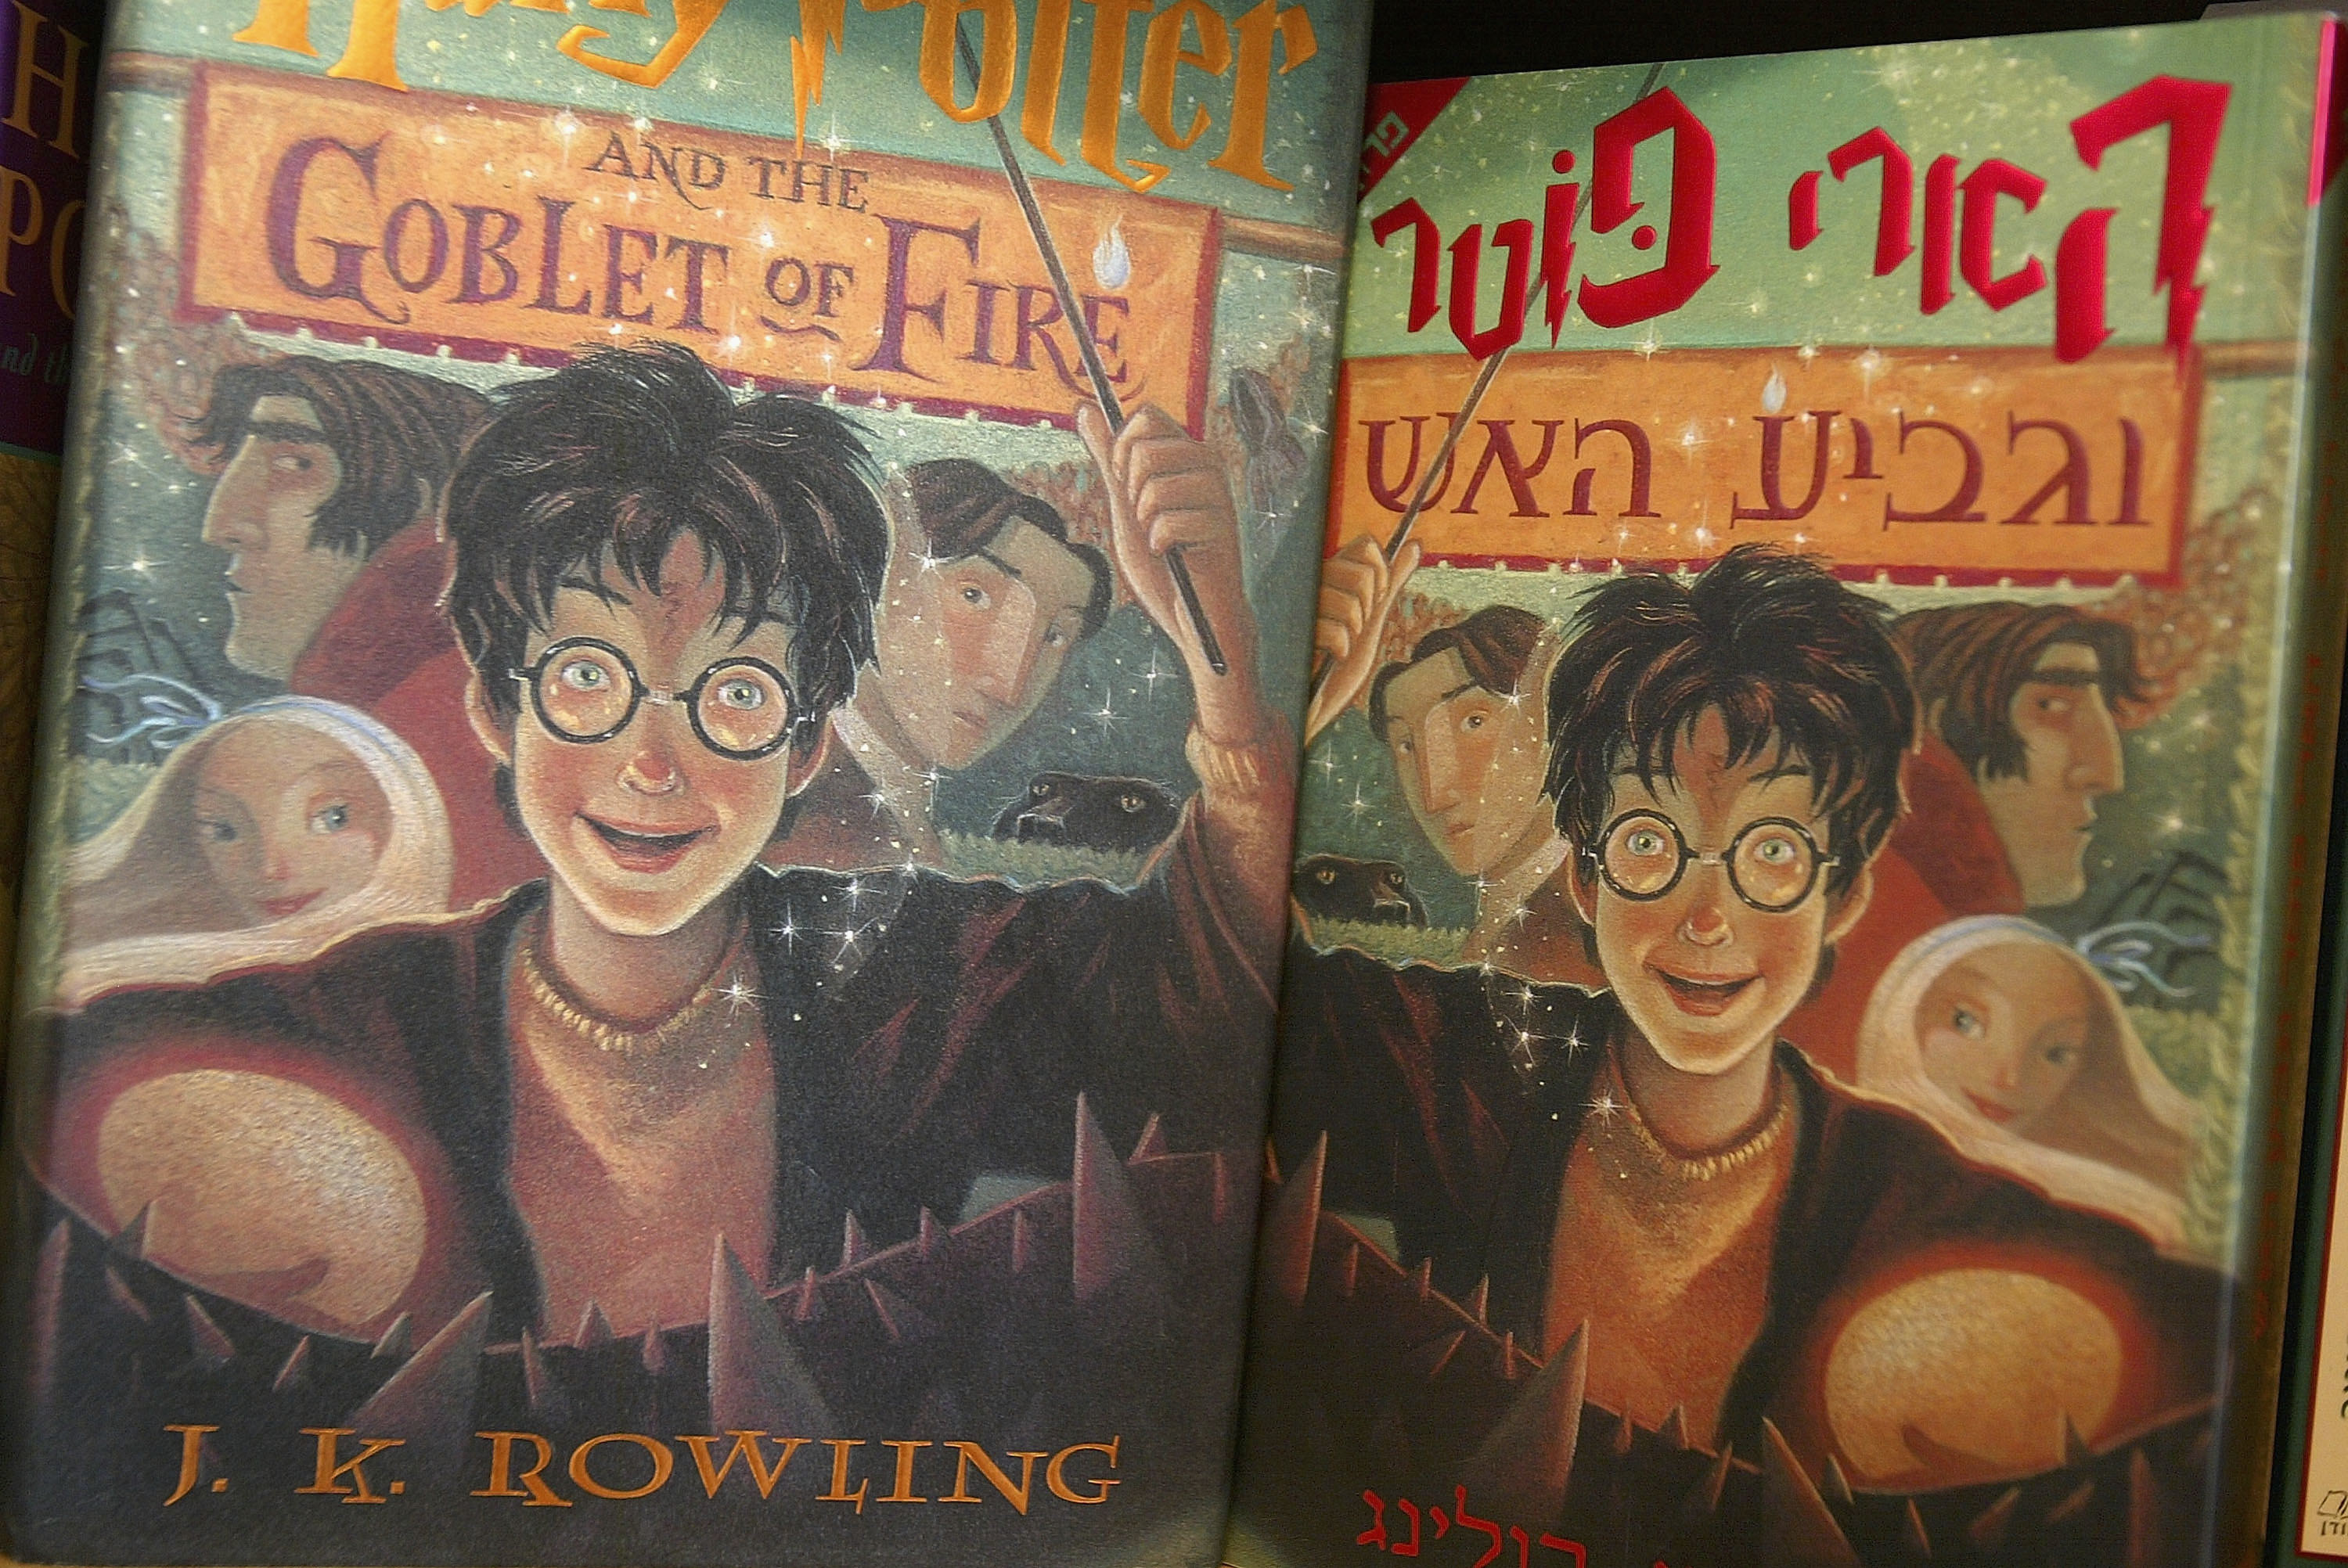 Hardcover copies of &quot;Harry Potter and the Goblet of Fire&quot;